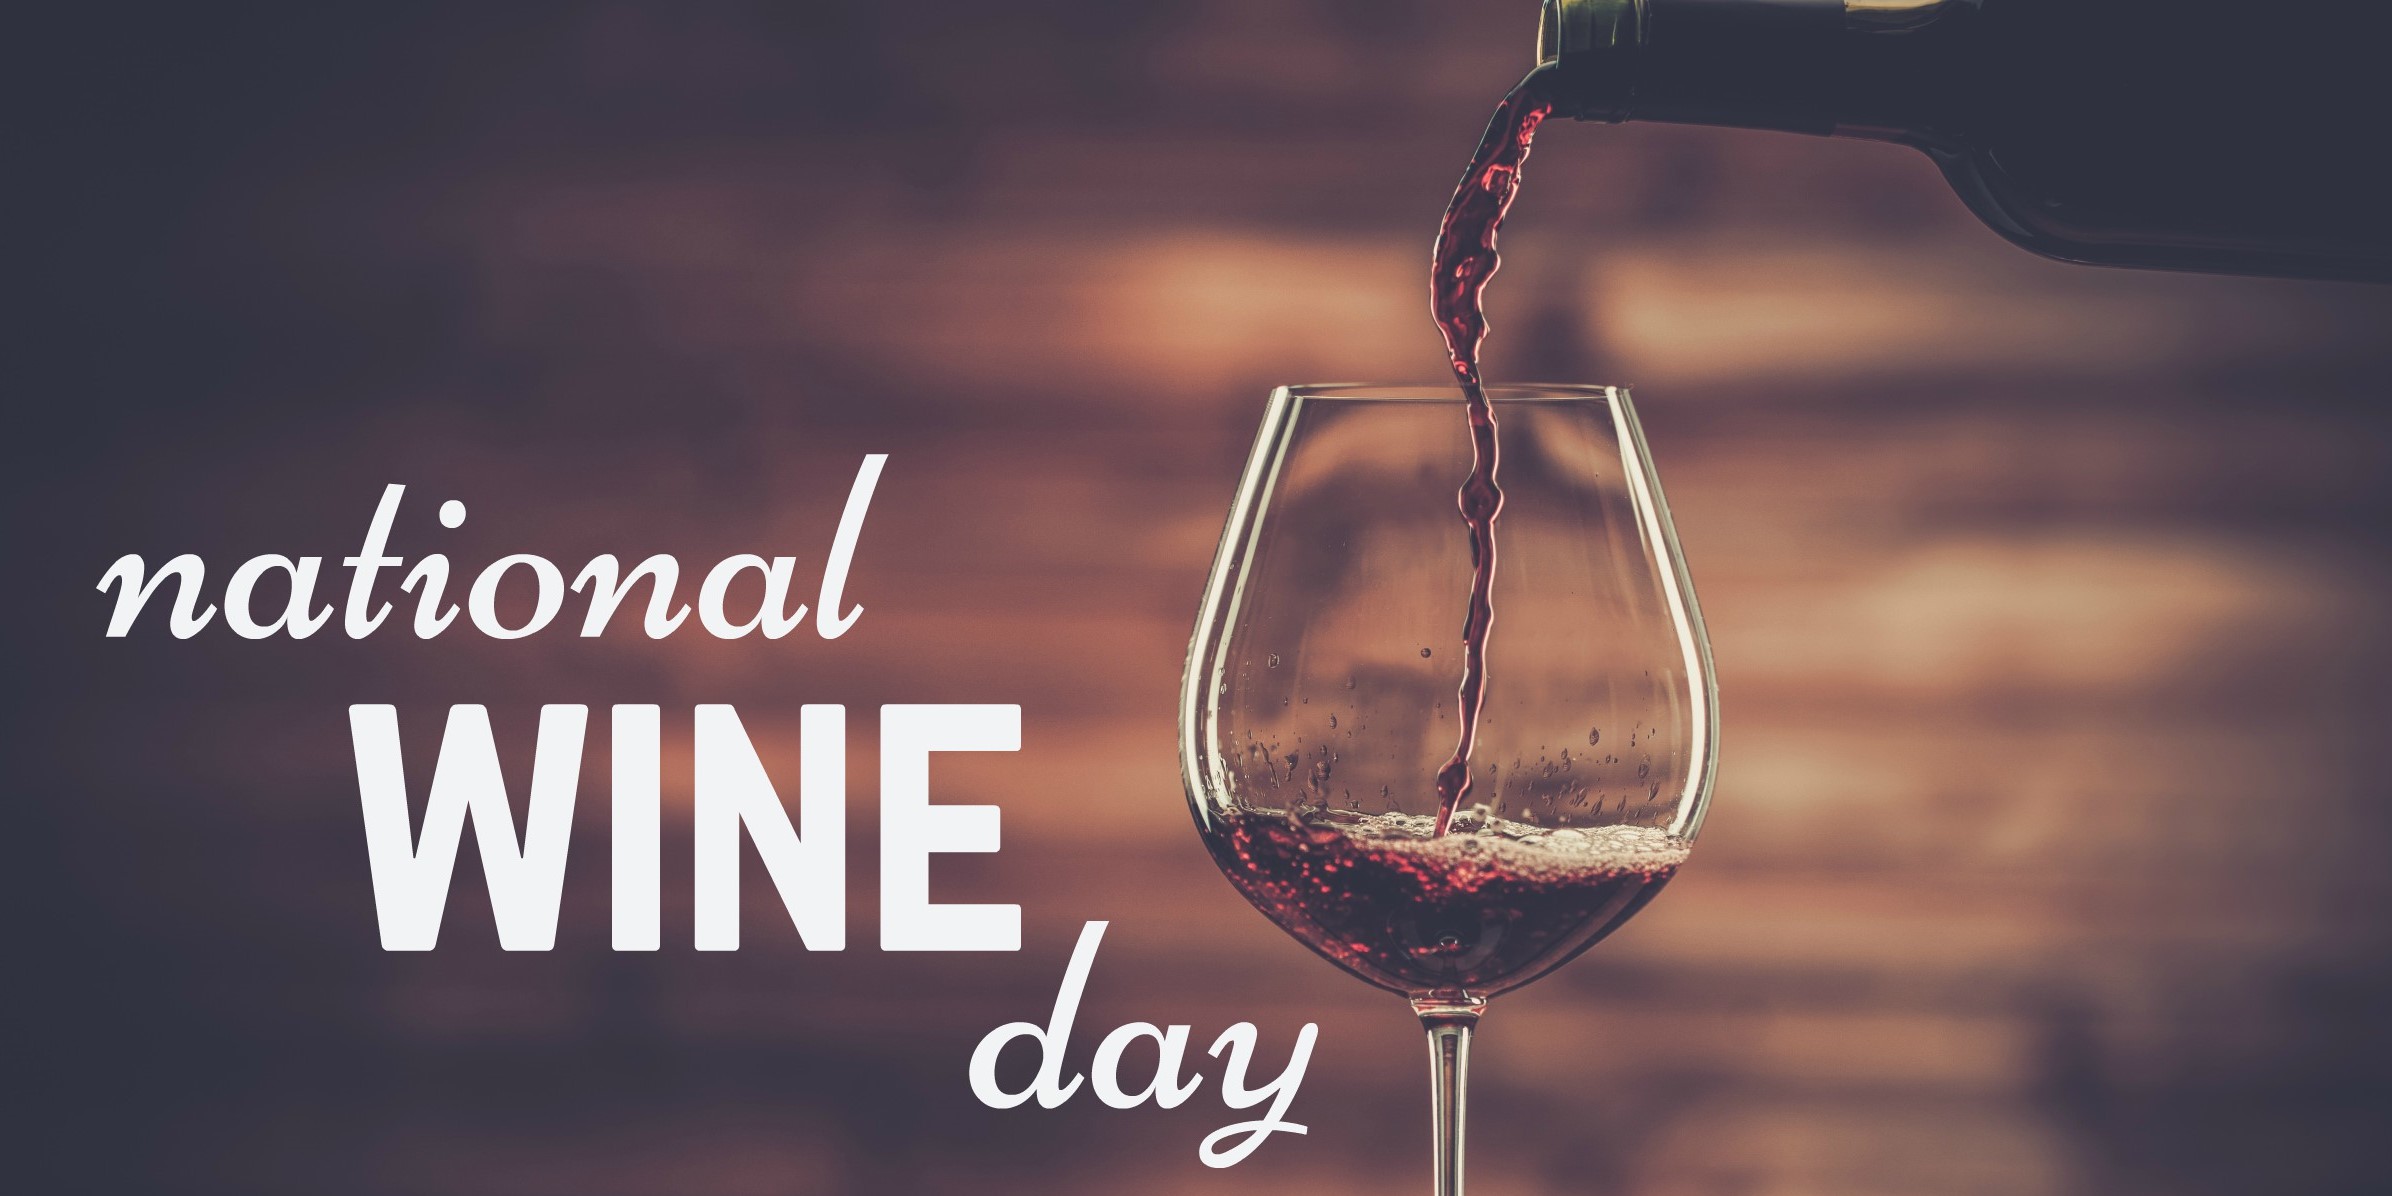 15 Facts About National Wine Day